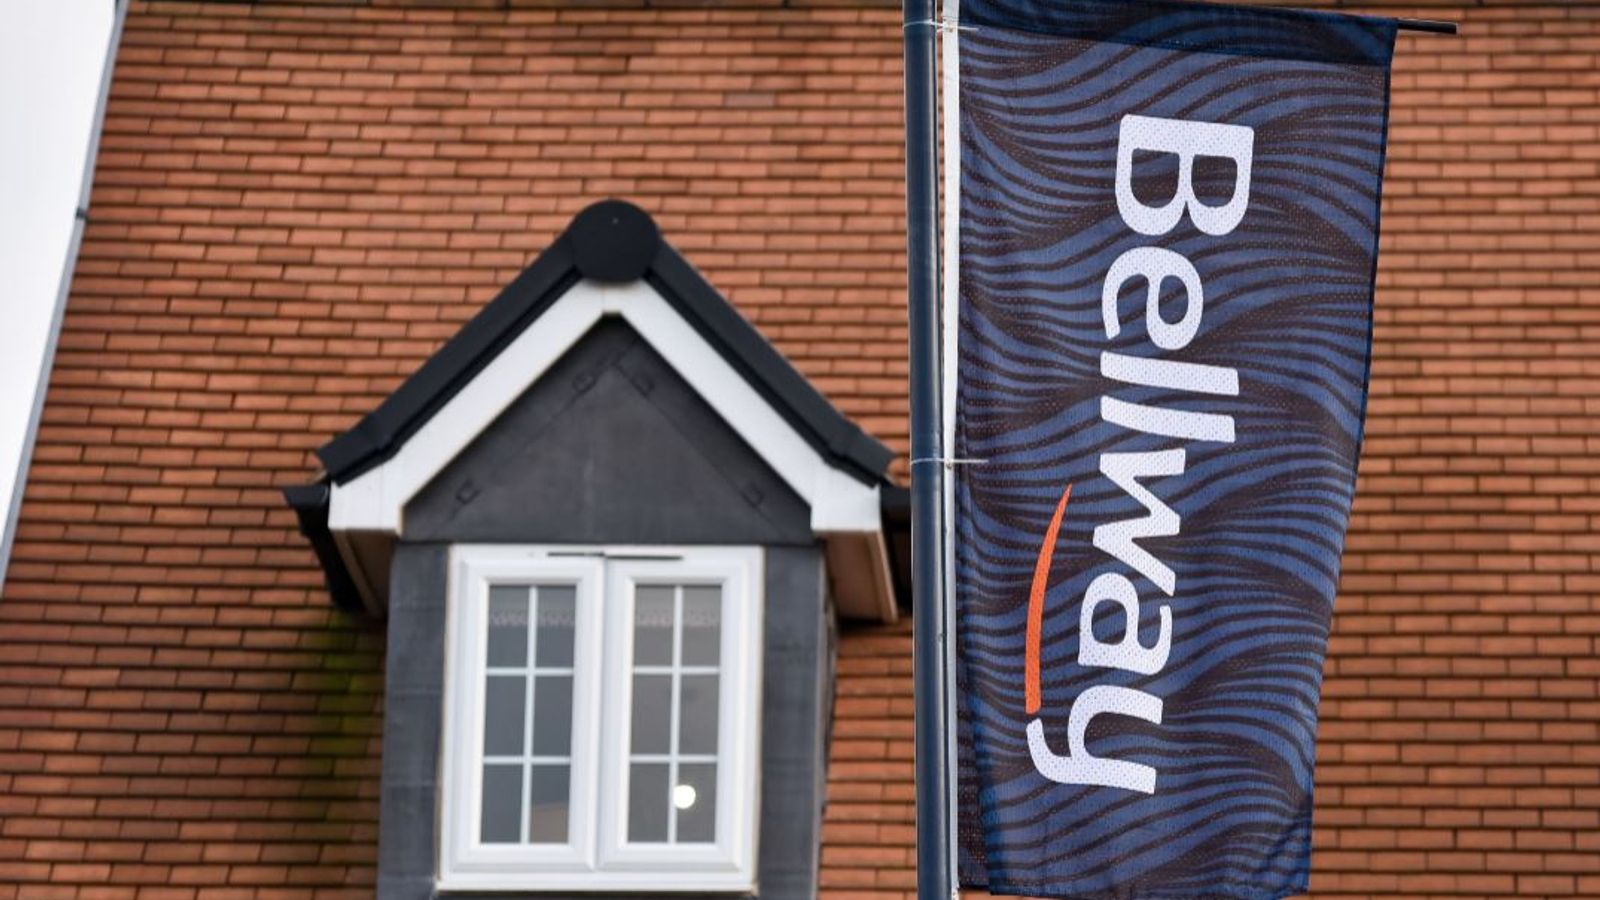 Bellway consulting on proposals to cut 90 jobs as housebuilder hit by slump in demand